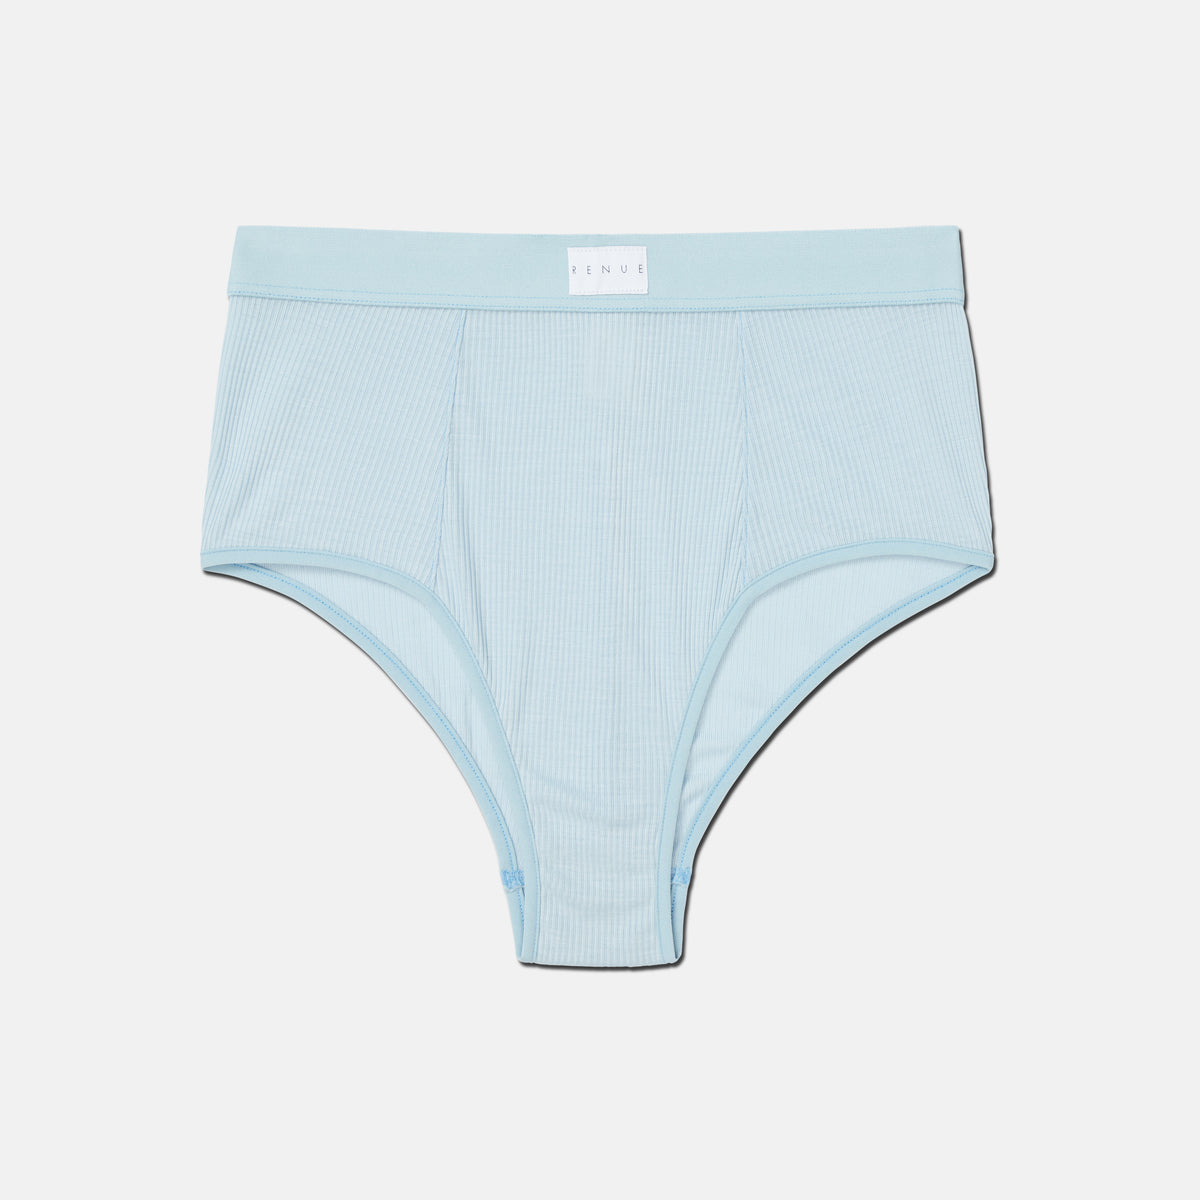 Renue The Label Offers Sustainable and Stylish Underwear